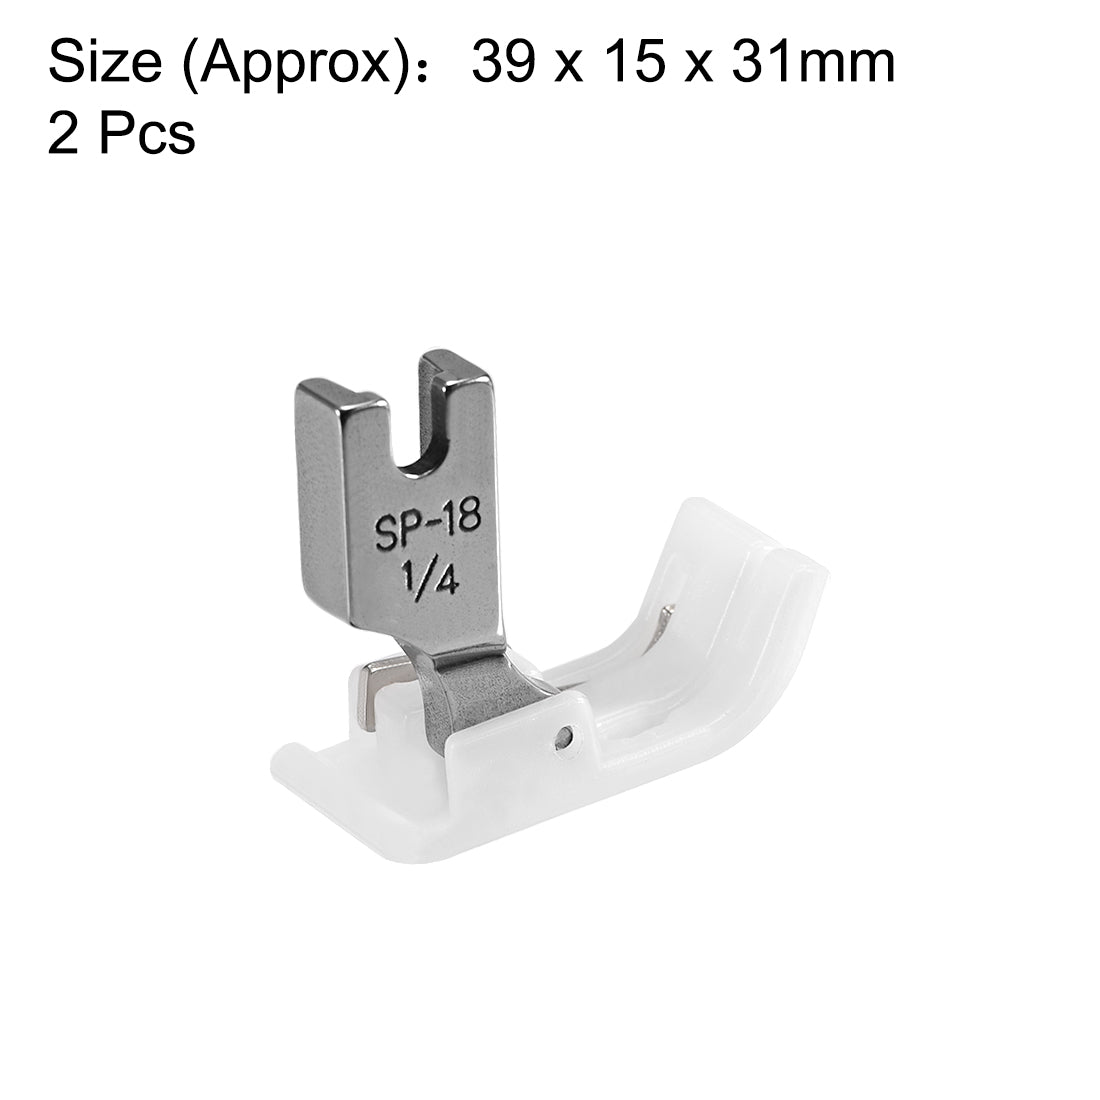 uxcell Uxcell #SP-18 Industrial Sewing Machine Hinged Presser Foot with Right Guide 1/4" (6mm) White 2pcs